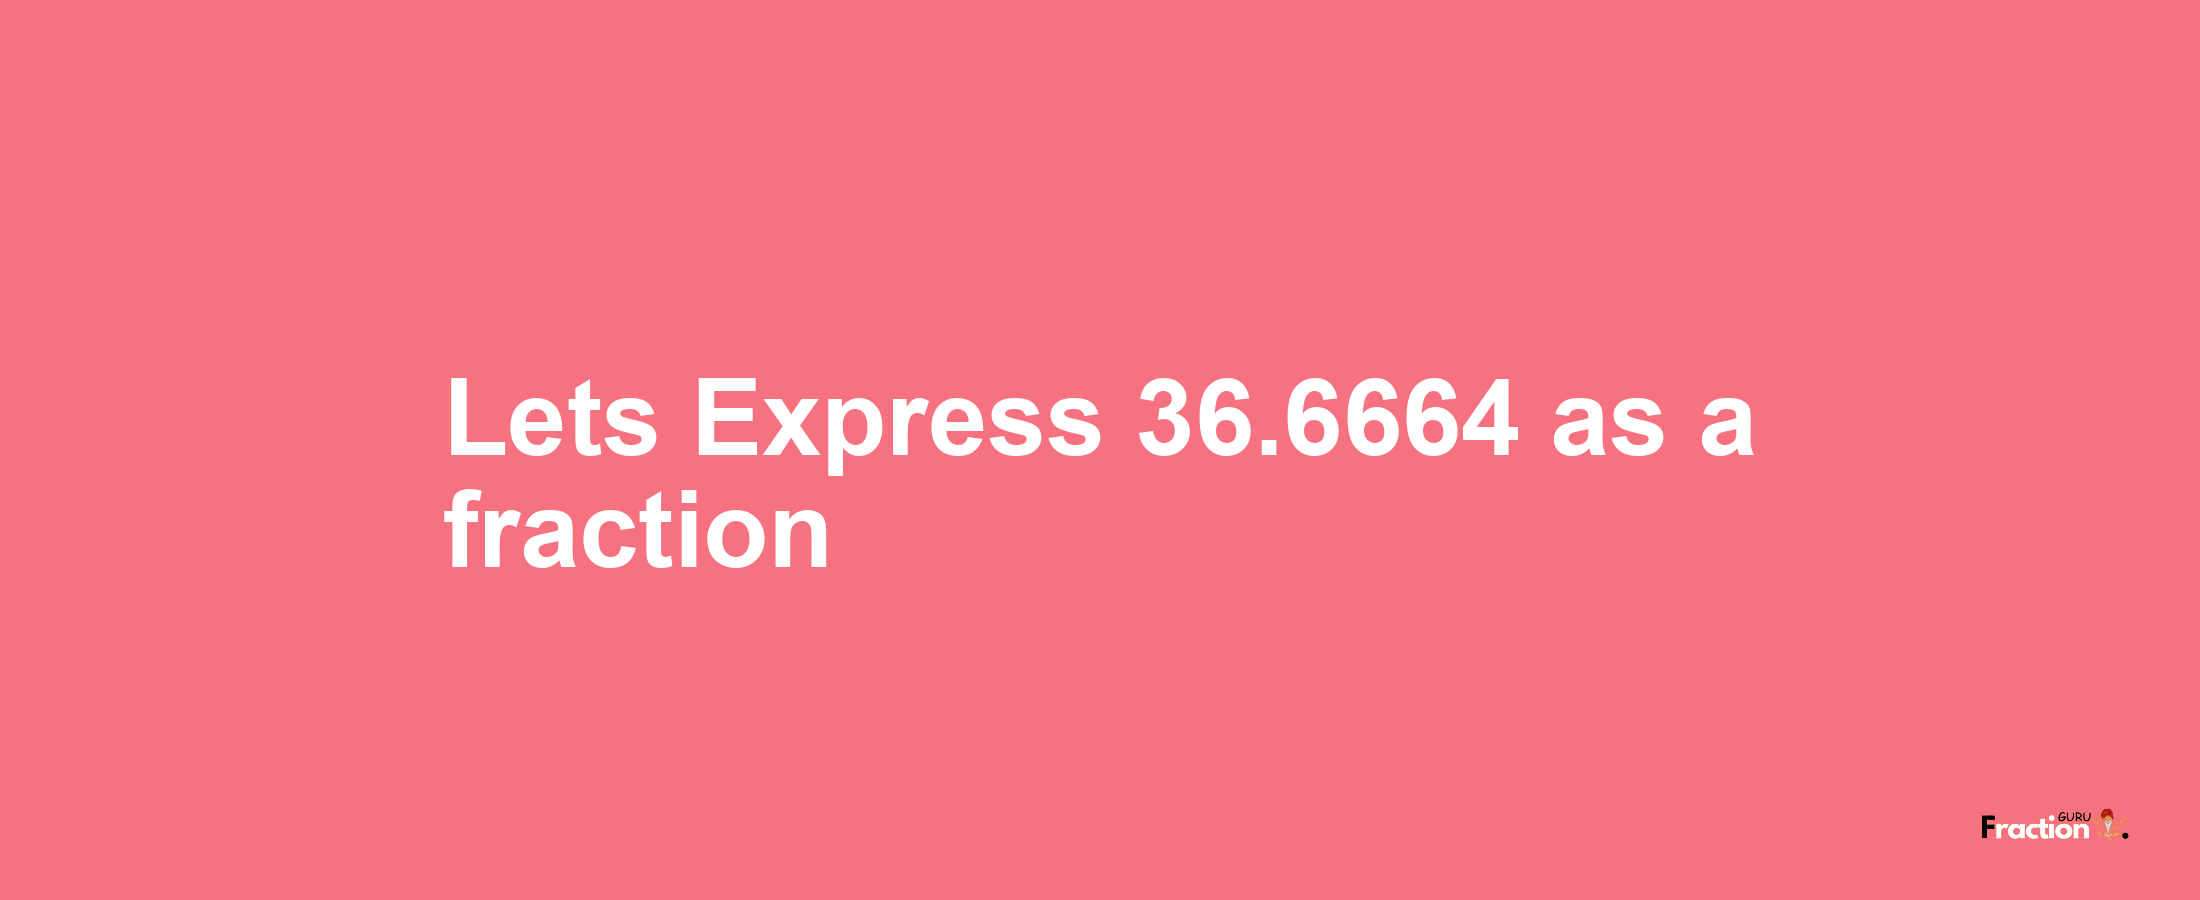 Lets Express 36.6664 as afraction